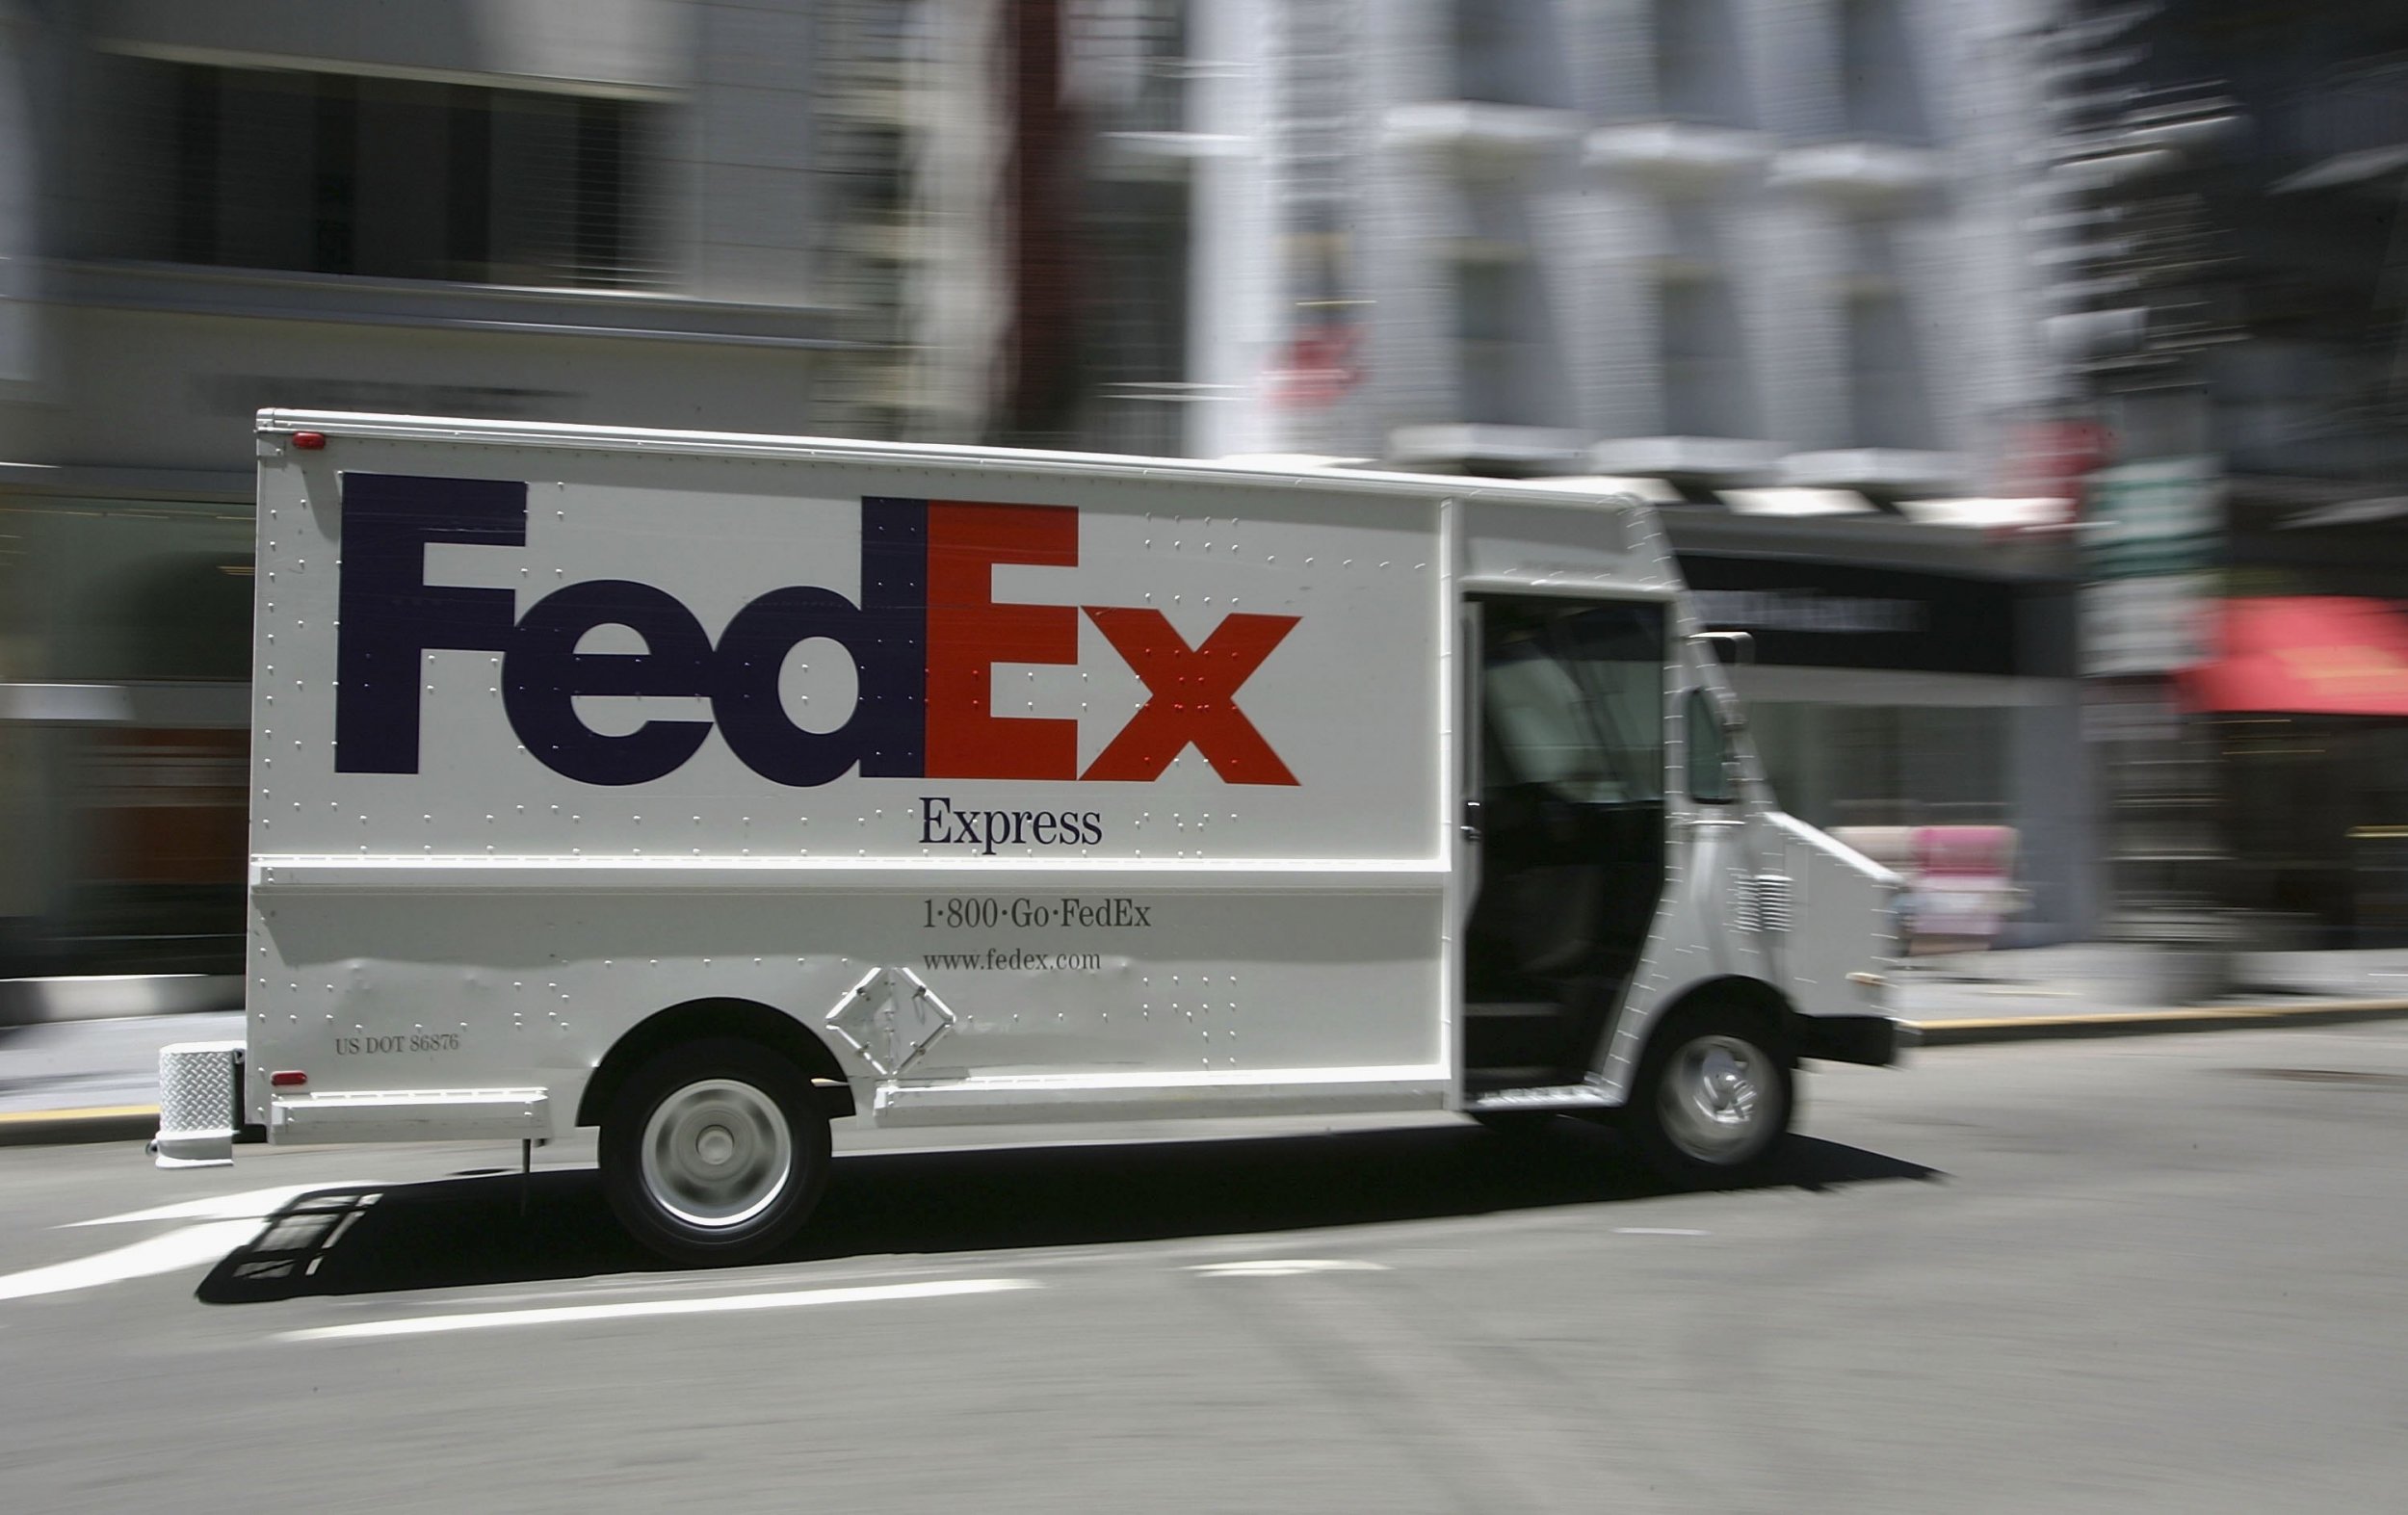 CCTV Captures FedEx Driver Chucking Package Onto Porch Without Leaving Truck